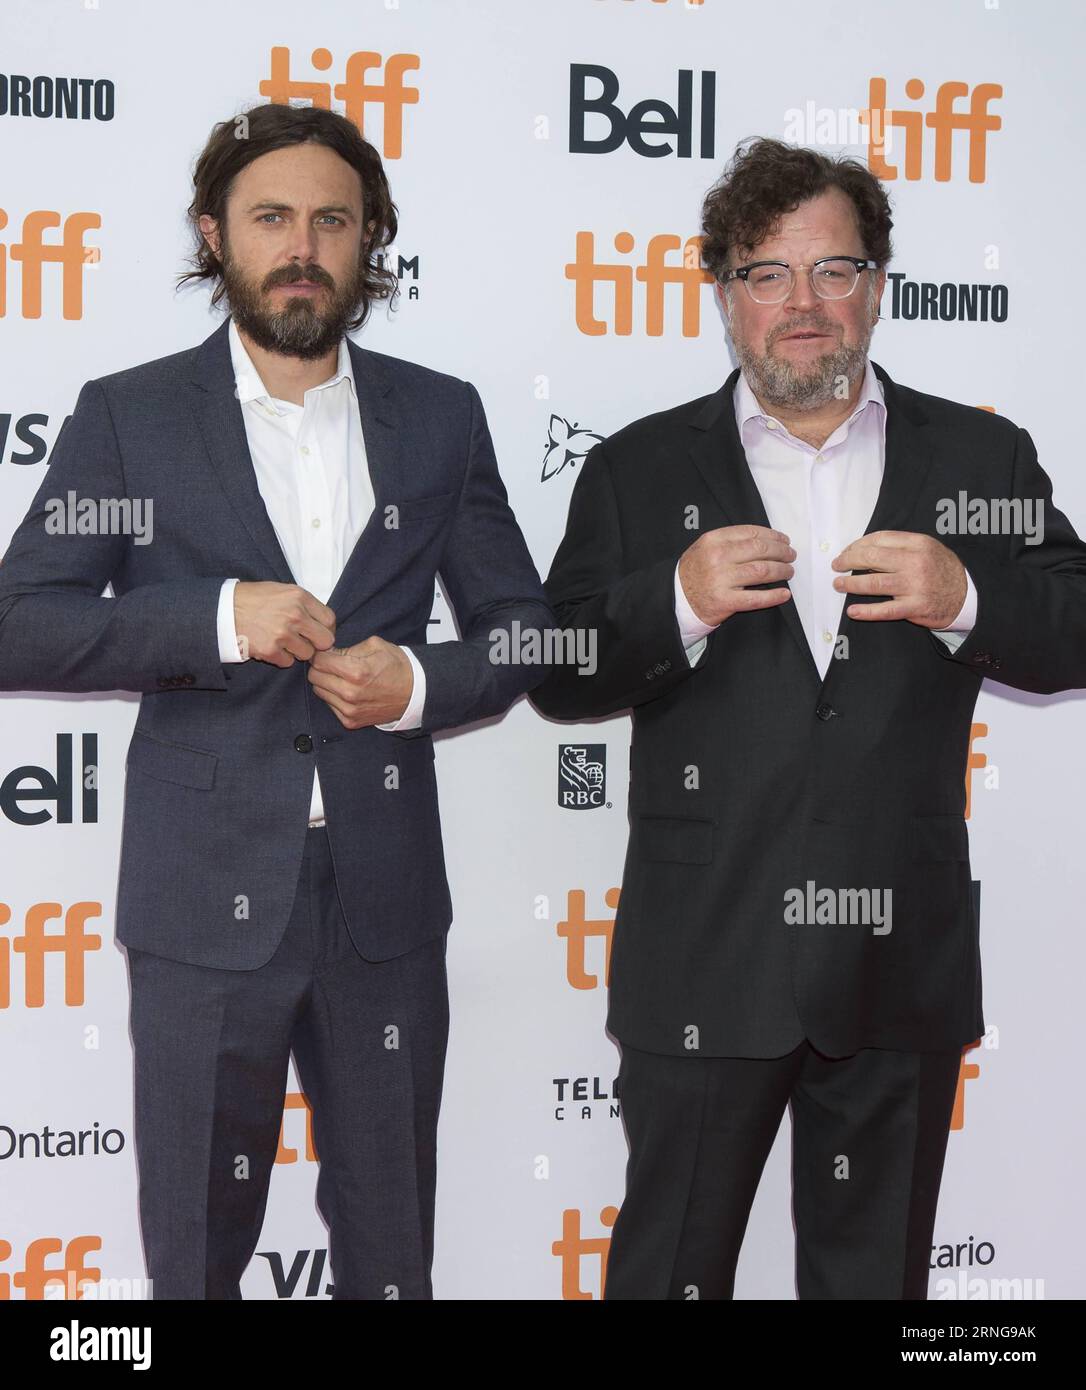 (160914) -- TORONTO, Sept. 13, 2016 -- Actor Casey Affleck (L) and director Kenneth Lonergan pose for photos before the international premiere of the film Manchester by the Sea at the Princess of Wales Theater during the 41st Toronto International Film Festival in Toronto, Canada, Sept. 13, 2016. ) (lrz) CANADA-TORONTO-FILM FESTIVAL- MANCHESTER BY THE SEA ZouxZheng PUBLICATIONxNOTxINxCHN   160914 Toronto Sept 13 2016 Actor Casey Affleck l and Director Kenneth Lonergan Pose for Photos Before The International Premiere of The Film Manchester by The Sea AT The Princess of Wales Theatre during The Stock Photo